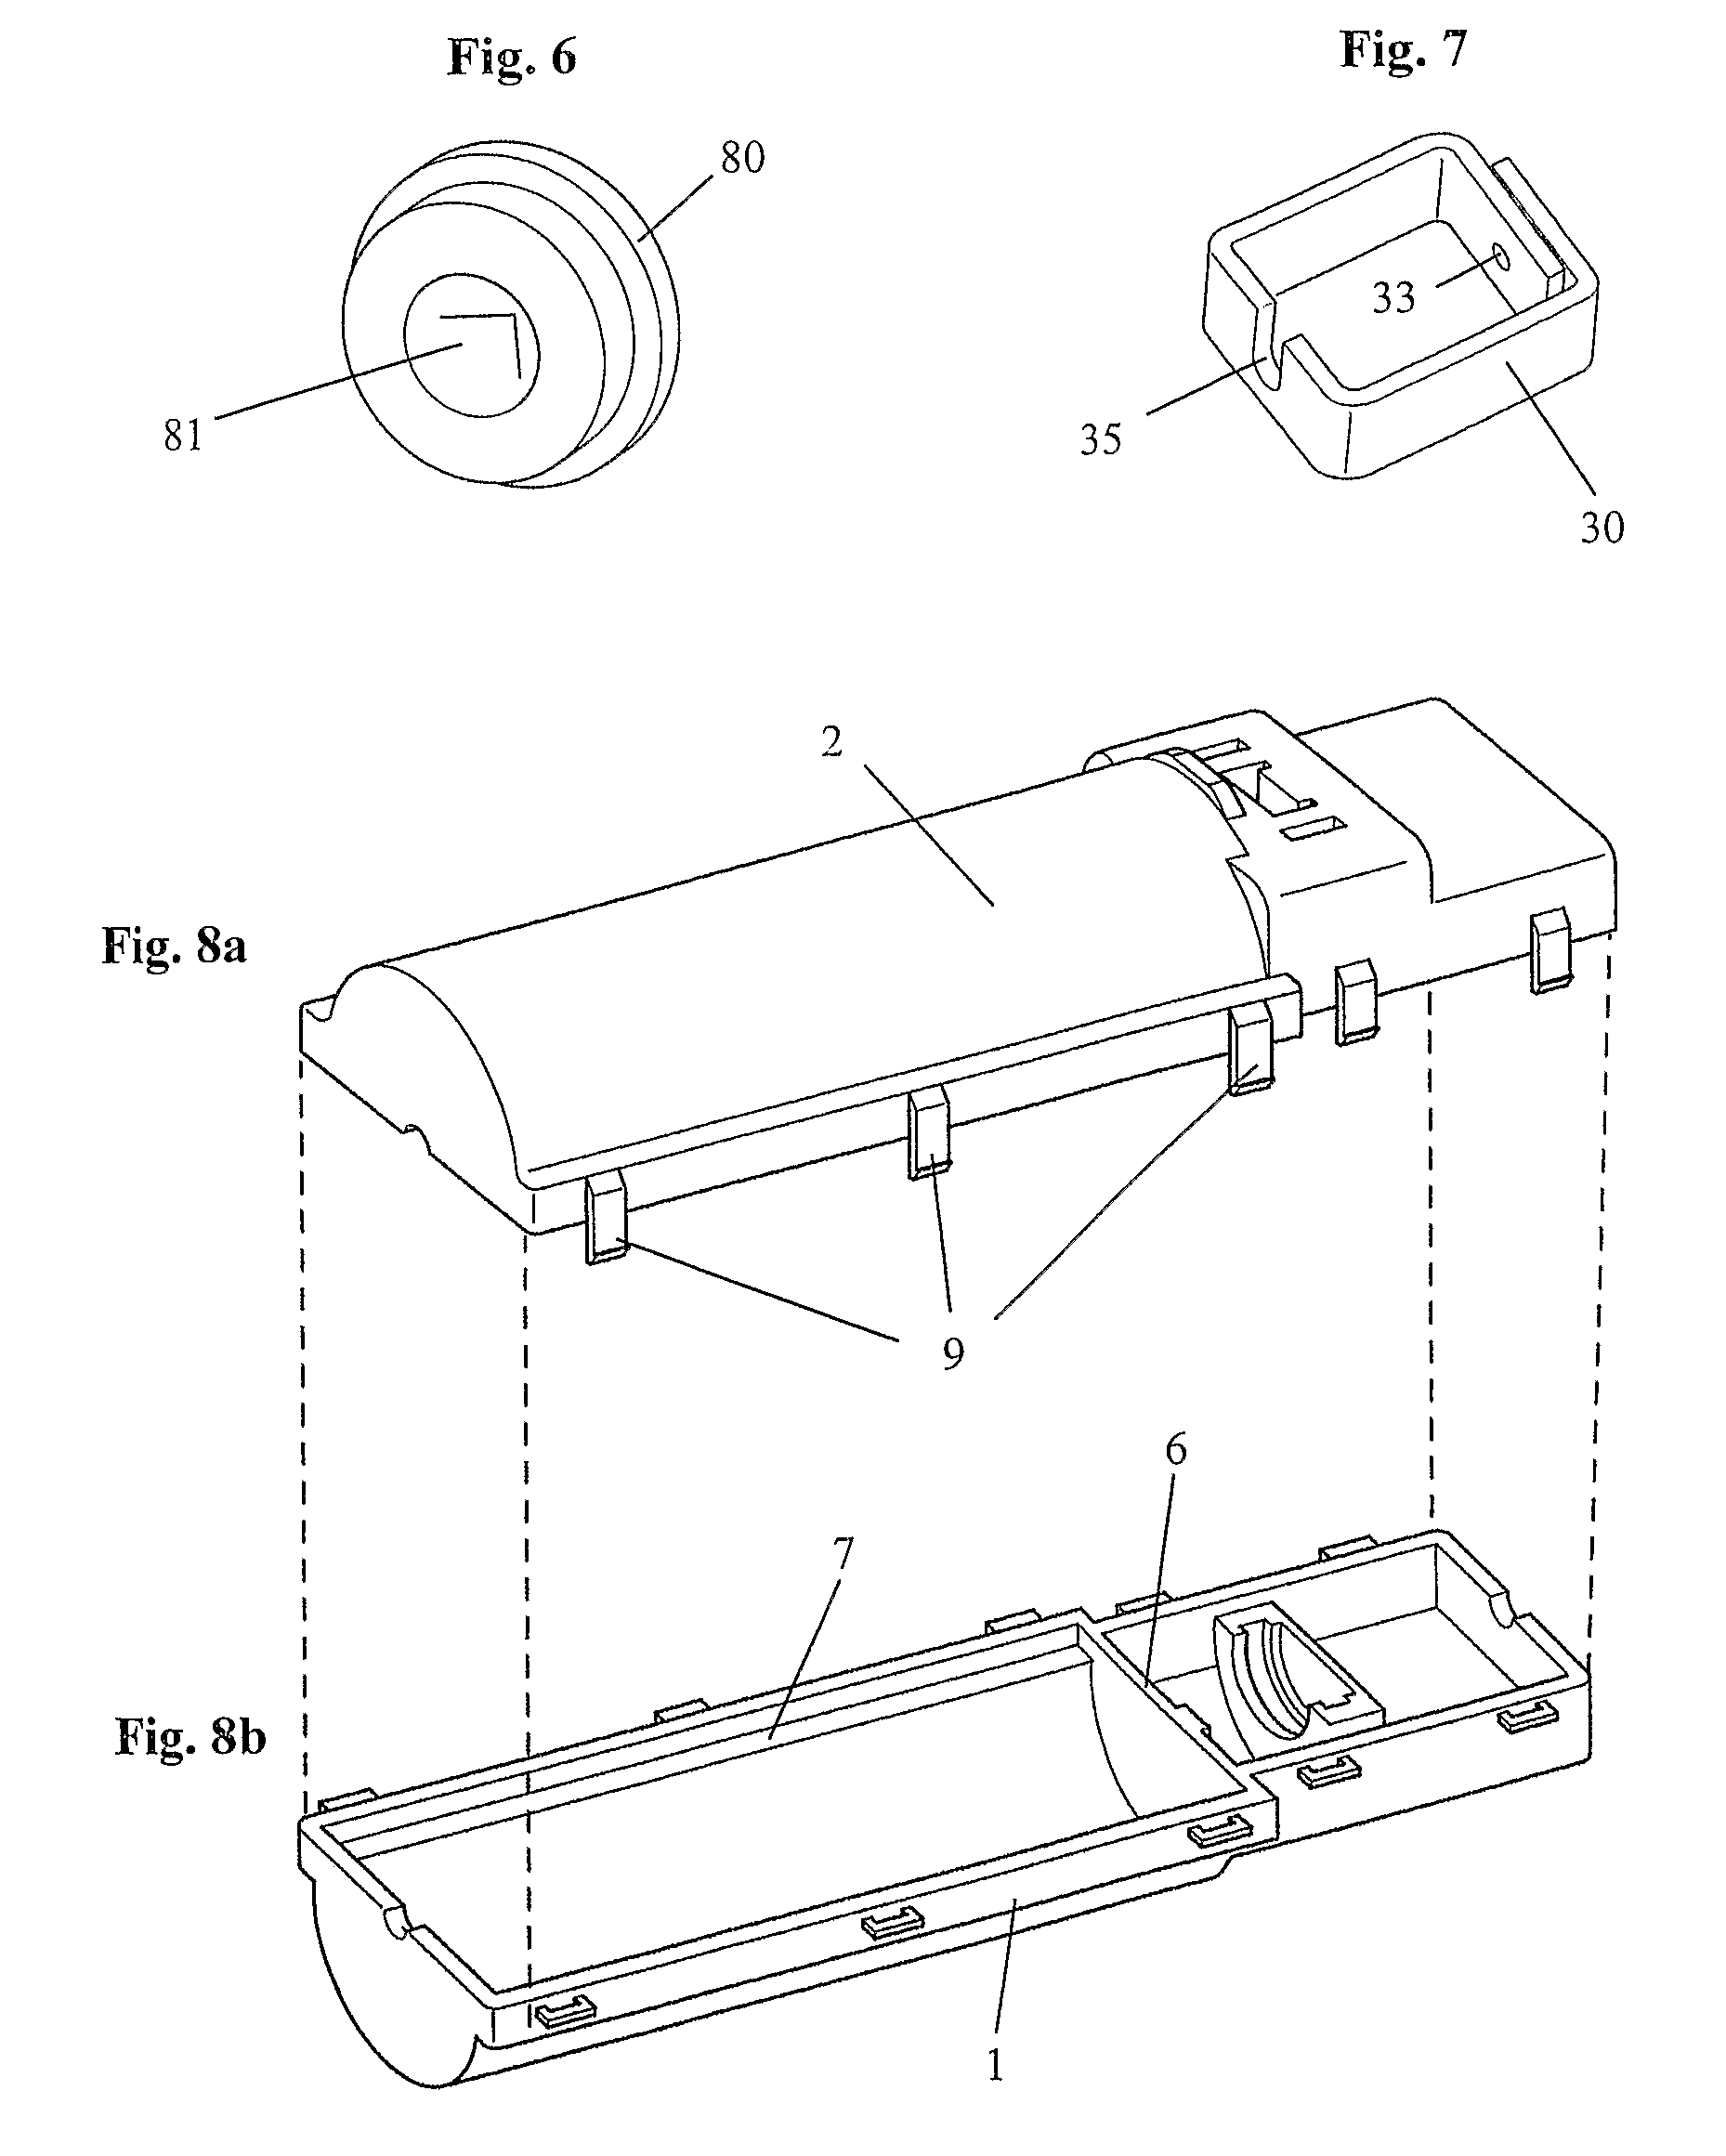 Device for Adjusting the Tension of a Pulling Element